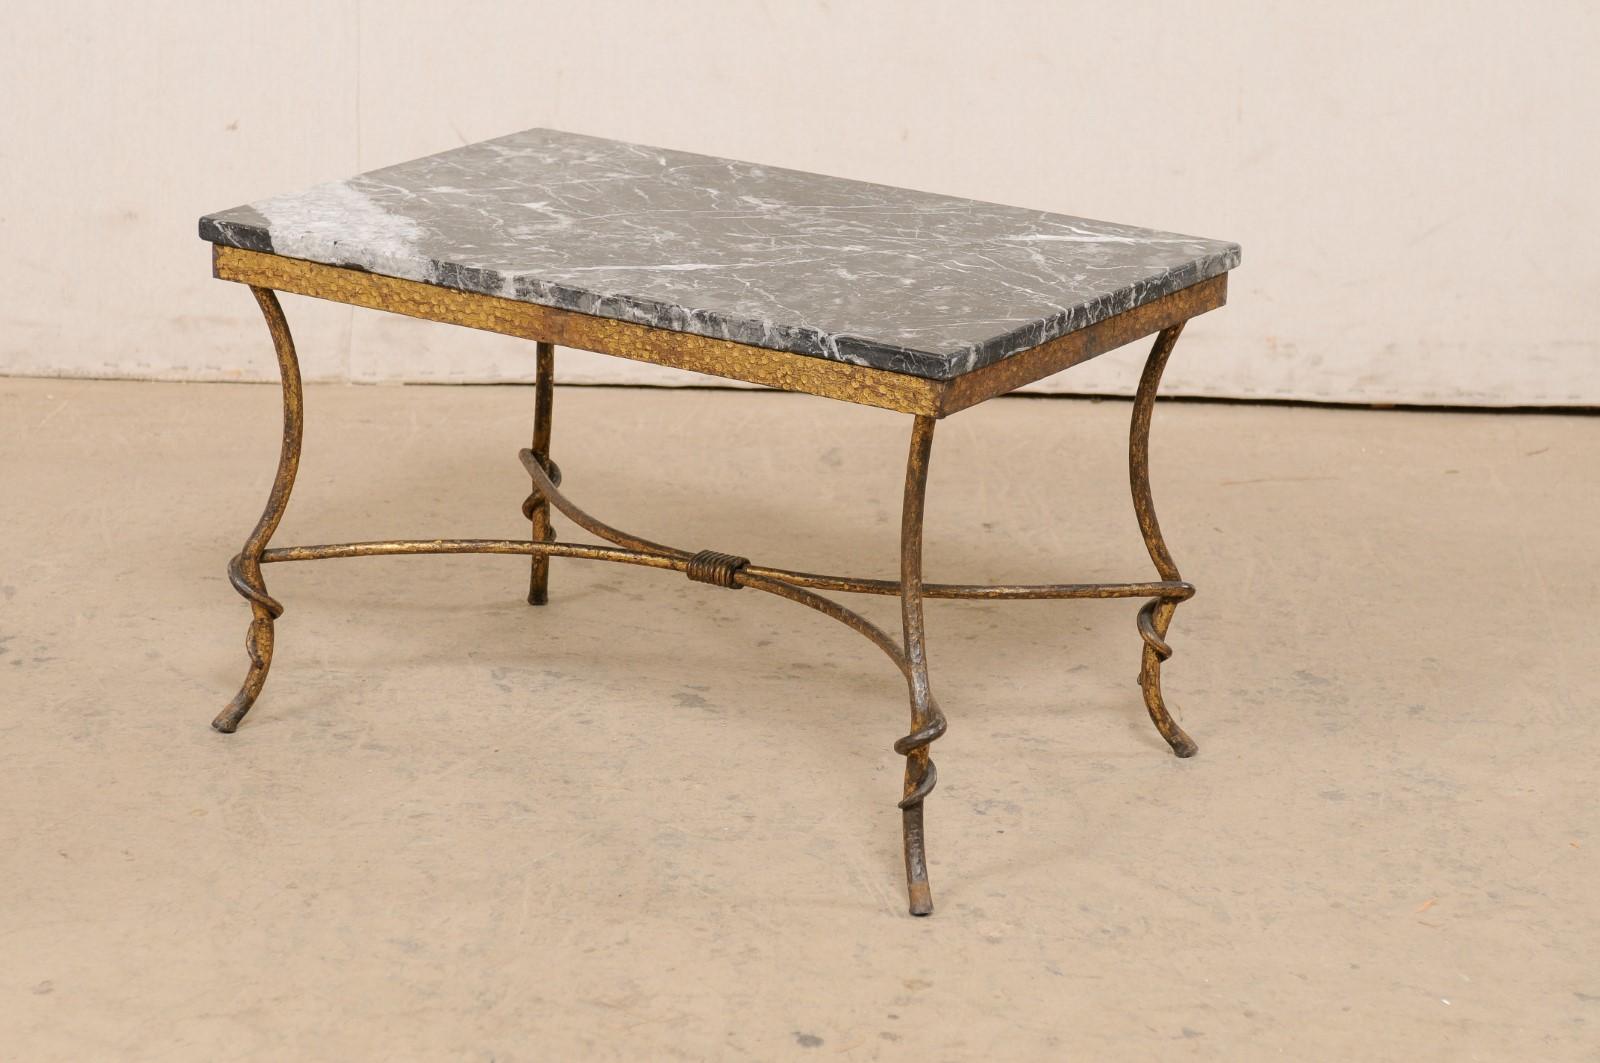 20th Century Spanish Marble-Top Rectangular Coffee Table w/Hammered Gold-Tone Iron Base